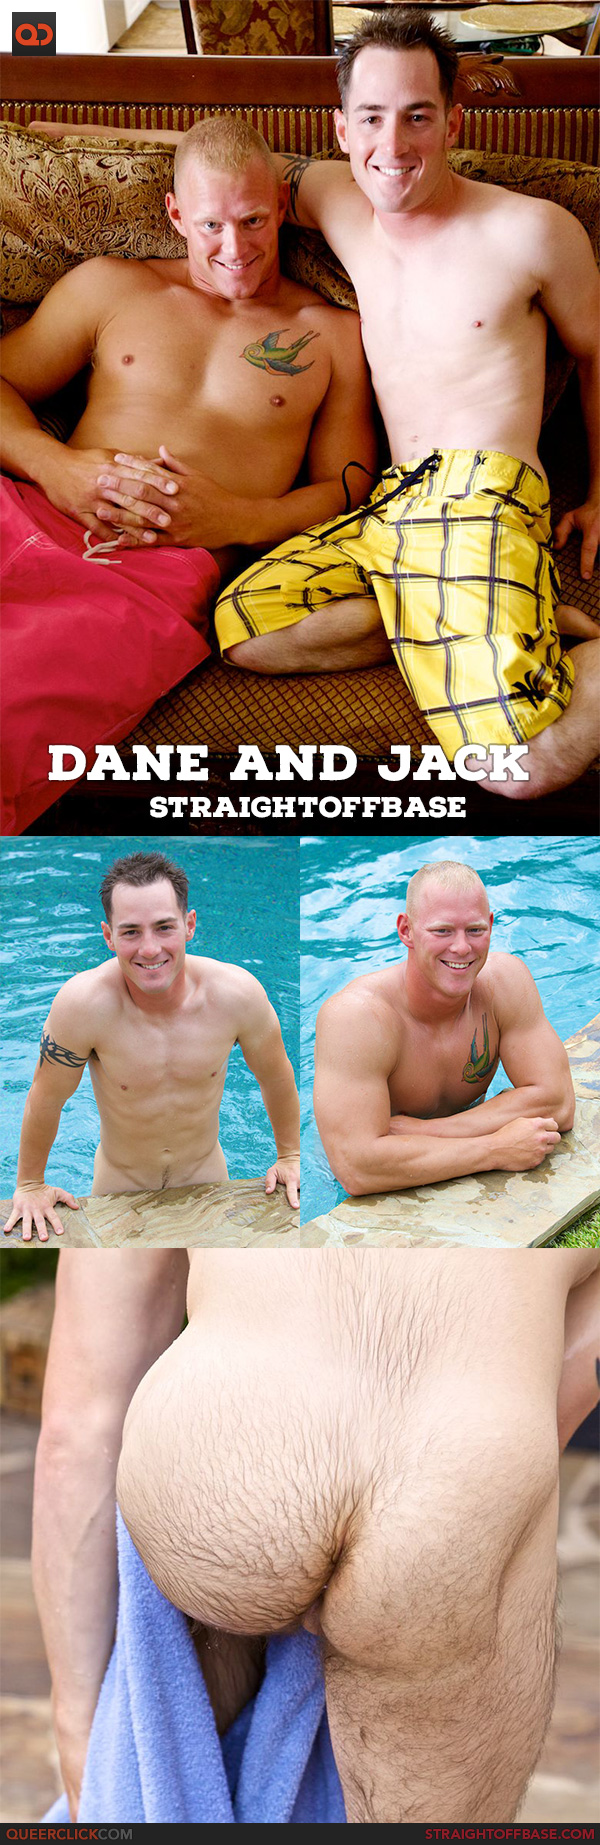 Straight Off Base: Dane and Jack